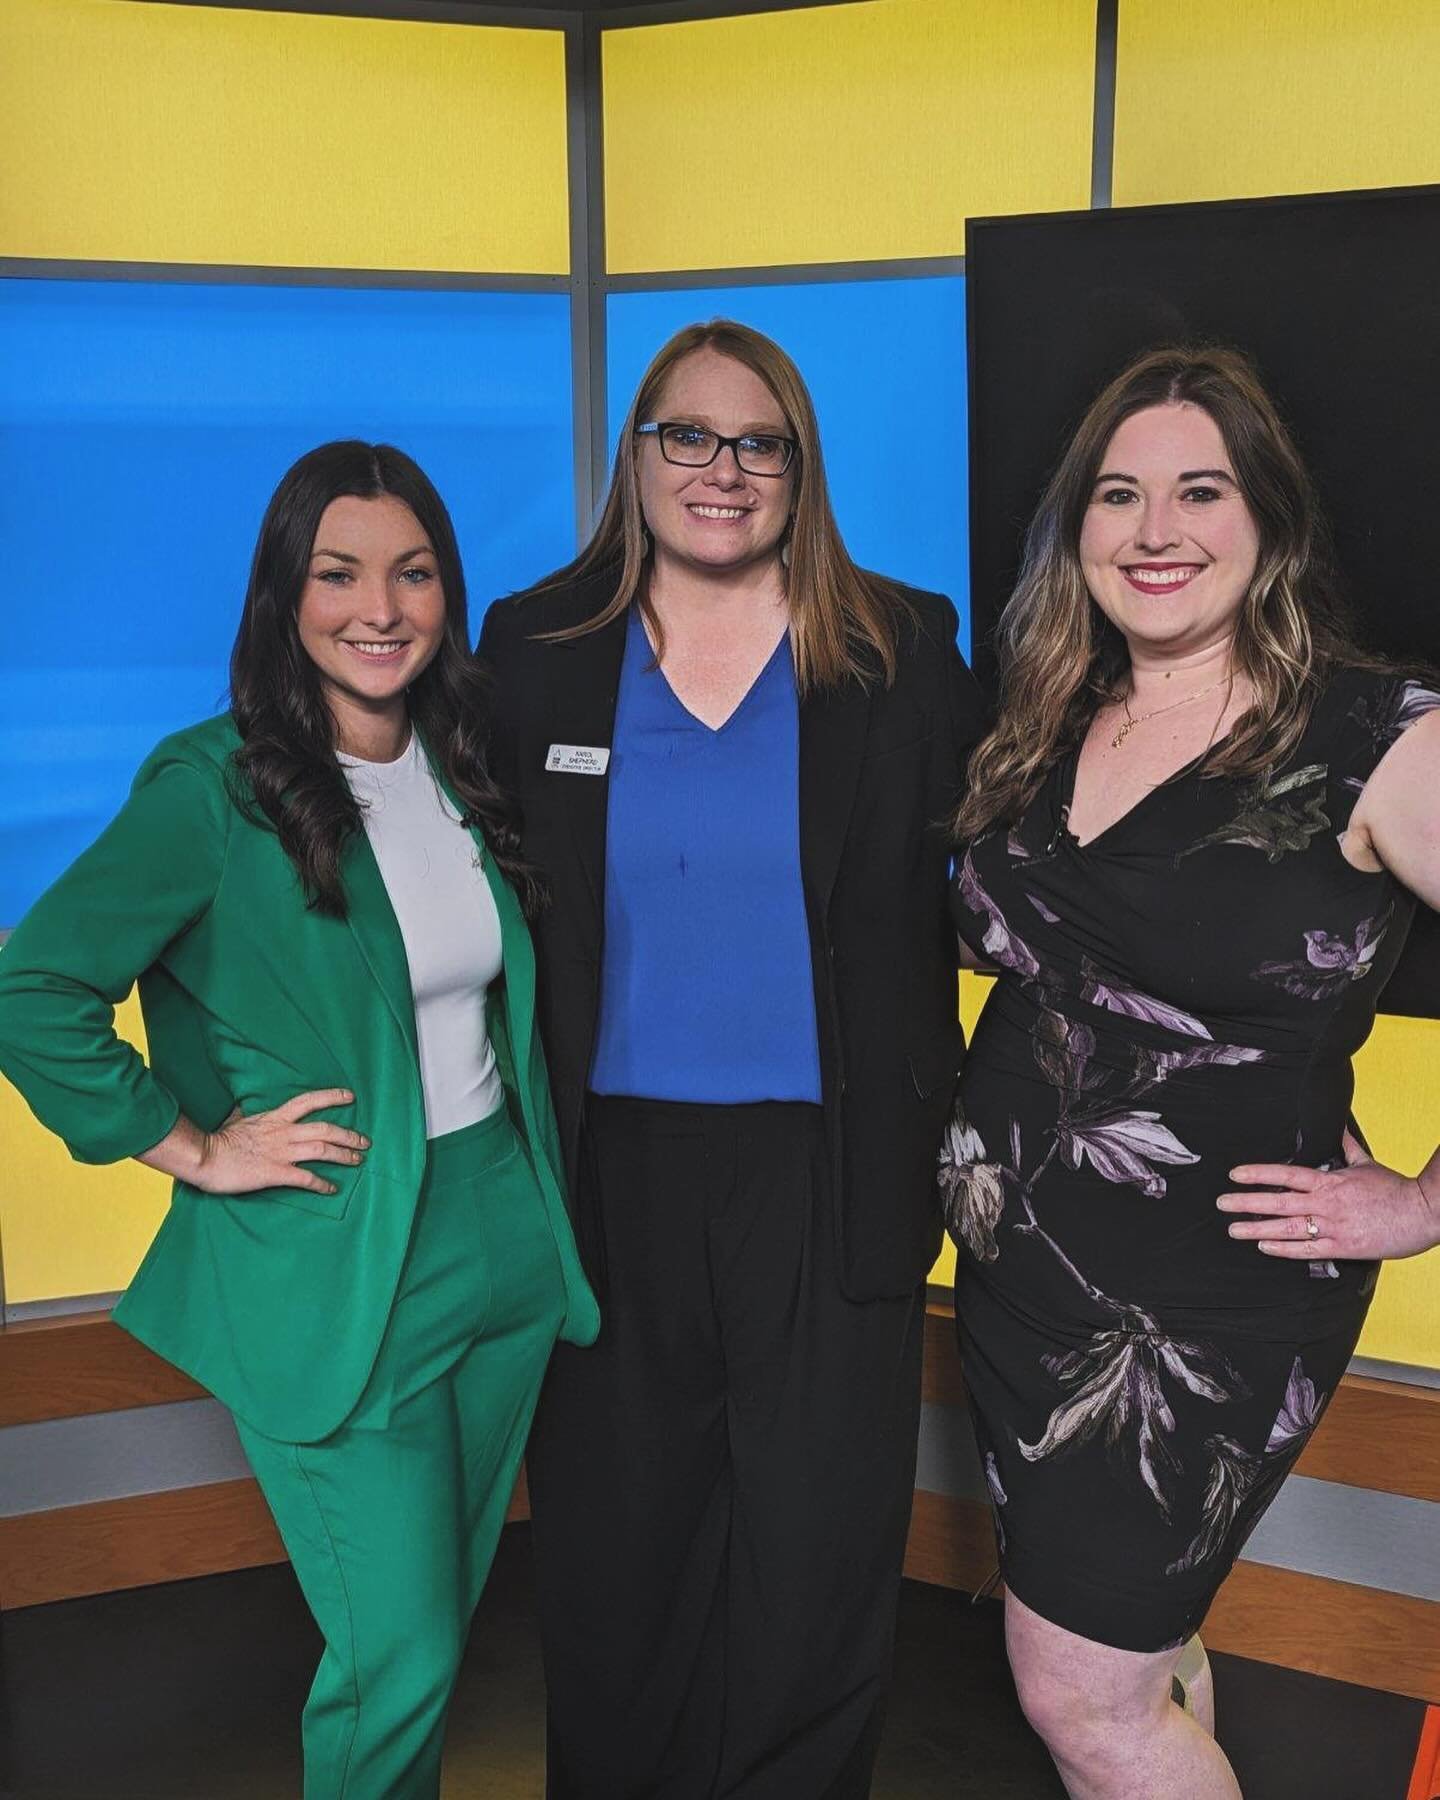 Spent our morning with Channel 2 chatting all things 𝗙𝗿𝗲𝗲𝗱𝗼𝗺 𝗙𝗘𝗔𝗦𝗧𝗶𝘃𝗮𝗹 !

Incase you missed it here&rsquo;s some important things to know:

📍 Greene Square Park
🗓️ May 3rd
⏰ 11am-7pm
💰 FREE to attend 

We will have local vendors an